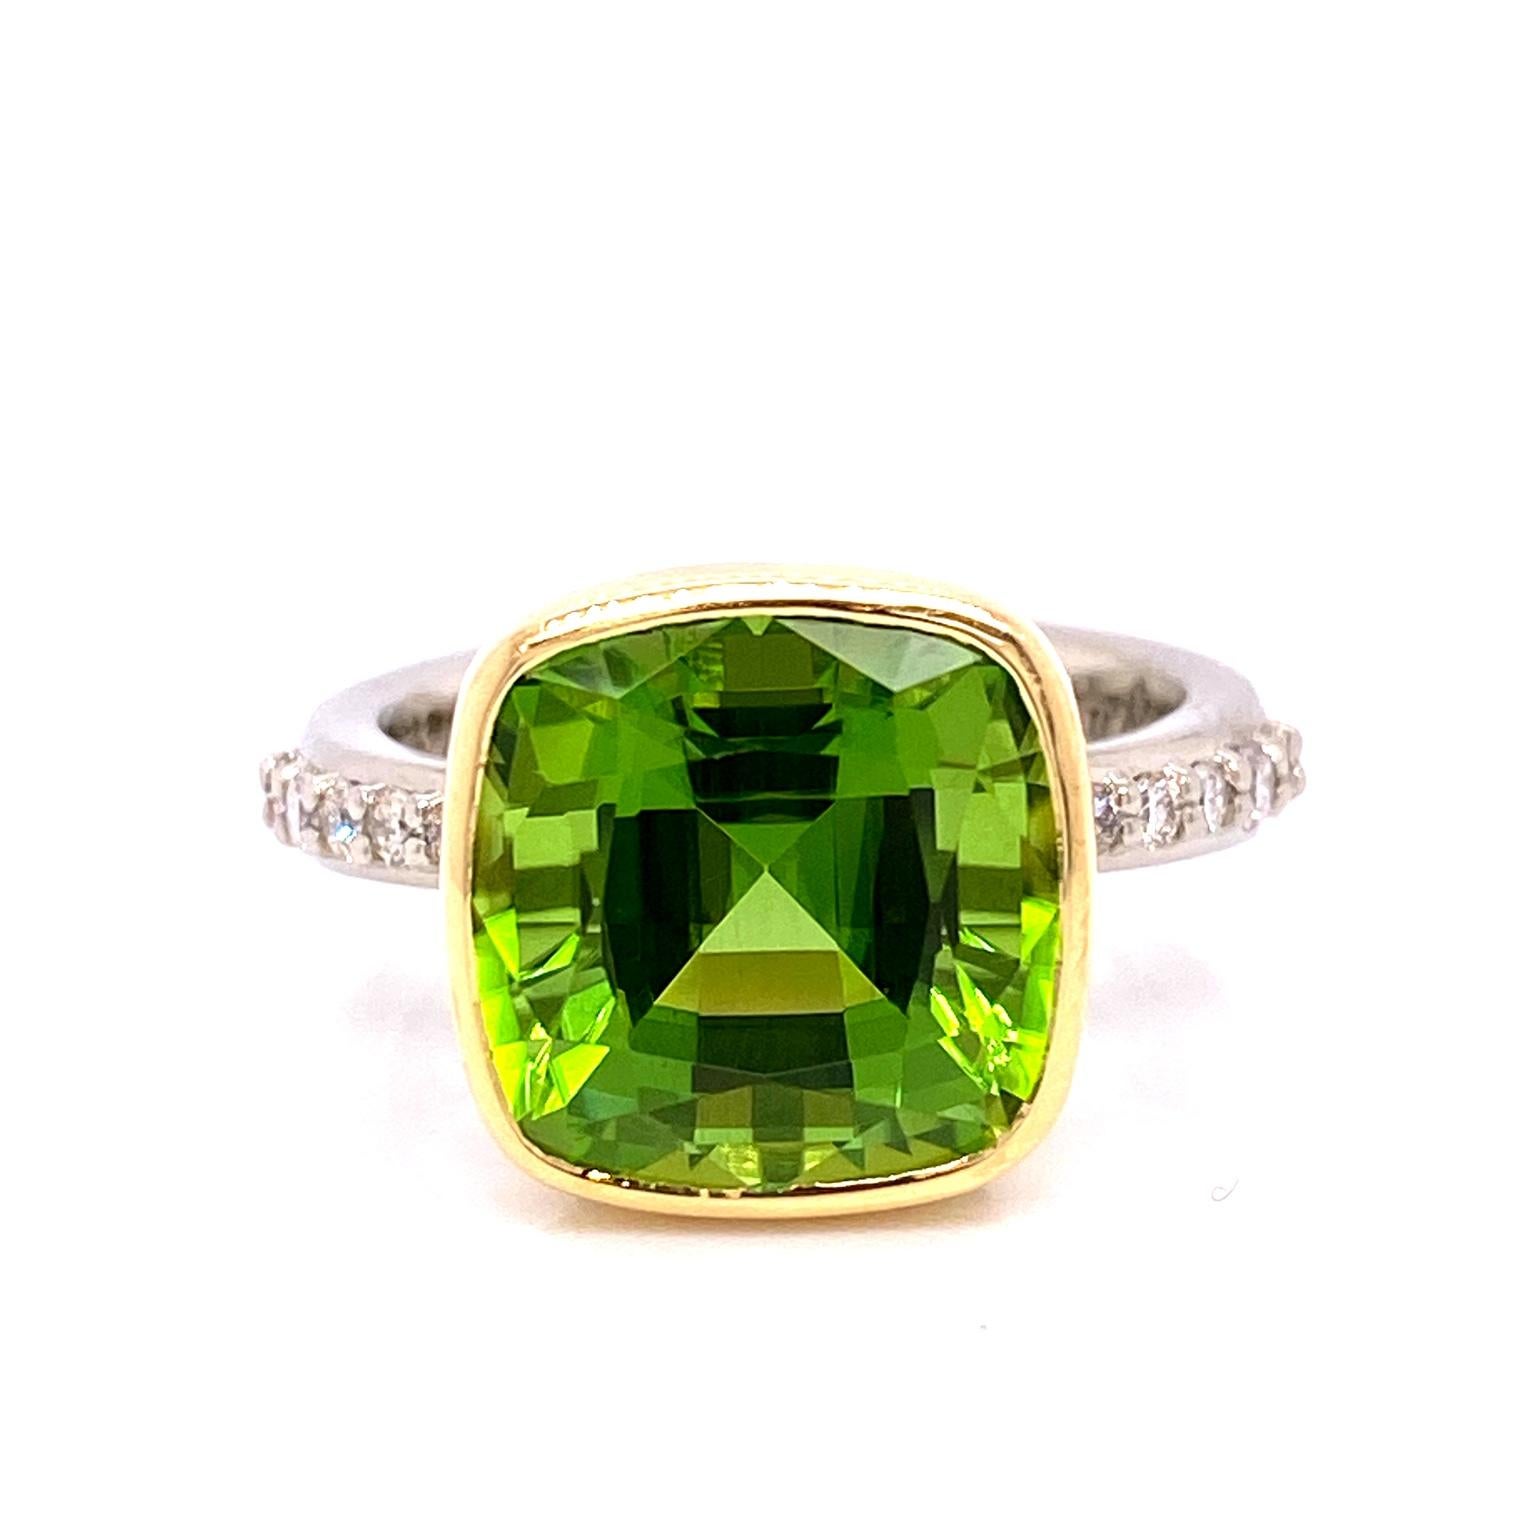 An 18k white and 18k yellow gold ring bezel set with a 7.96 carat cushion cut faceted peridot with ten round full cut white diamonds, 0.20 total carat weight F color VS clarity. This ring was custom designed and made by llyn strong.